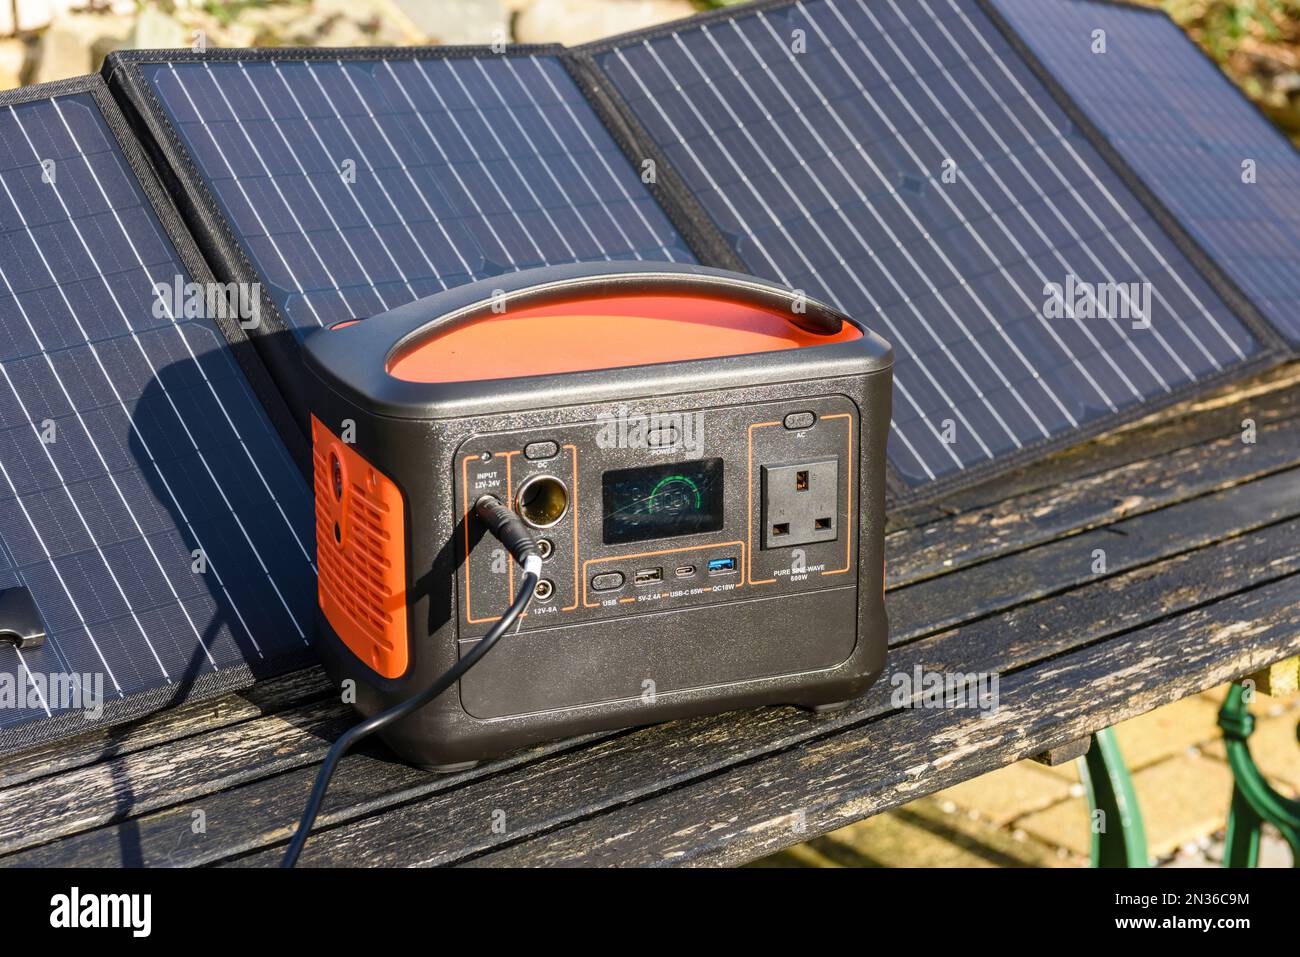 Solar generator battery pack being charged by panels in the sun Stock Photo